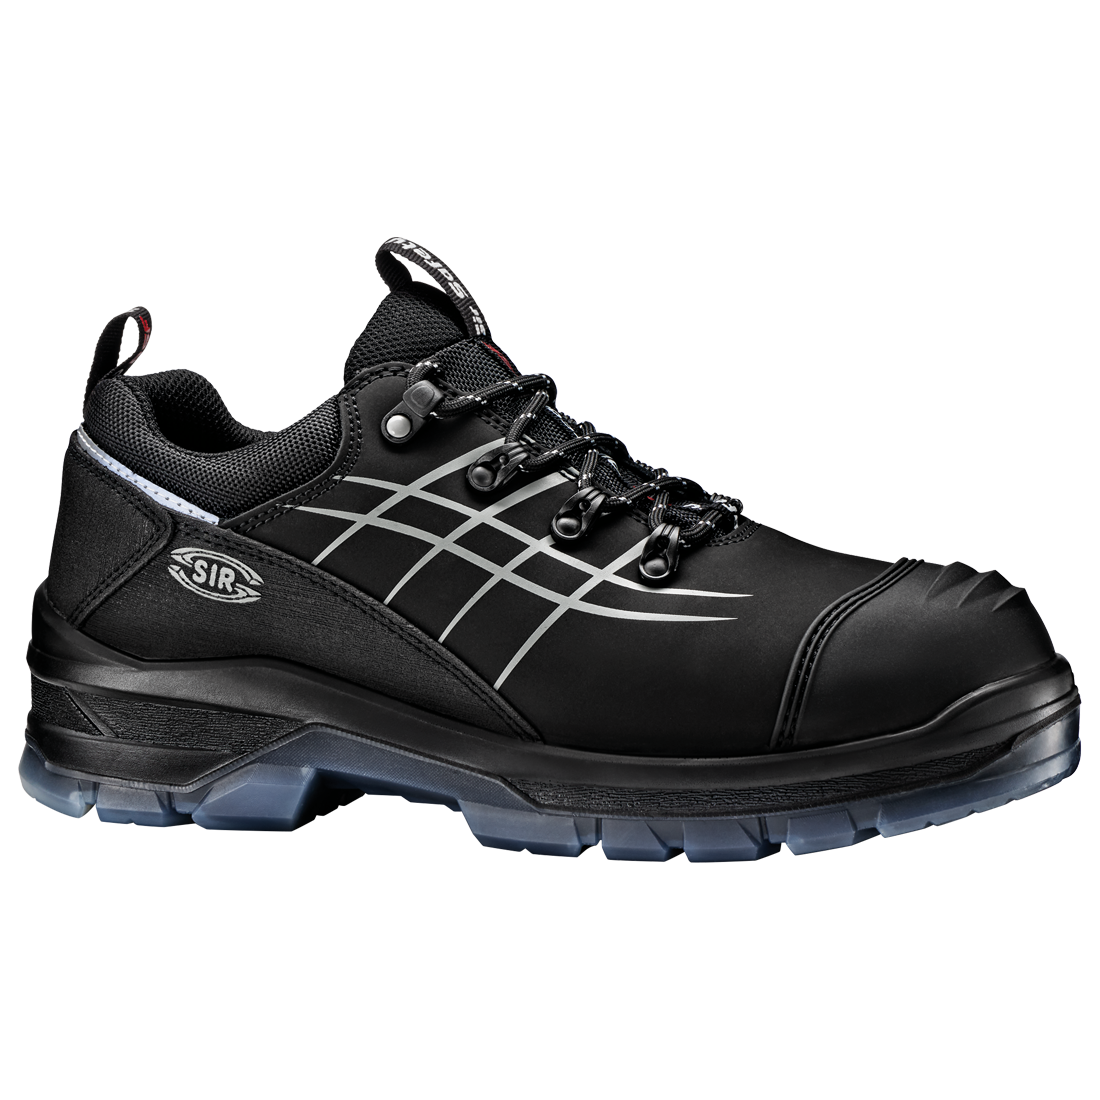 NEW OVERCAP BSF REX SHOE | Sir Safety System